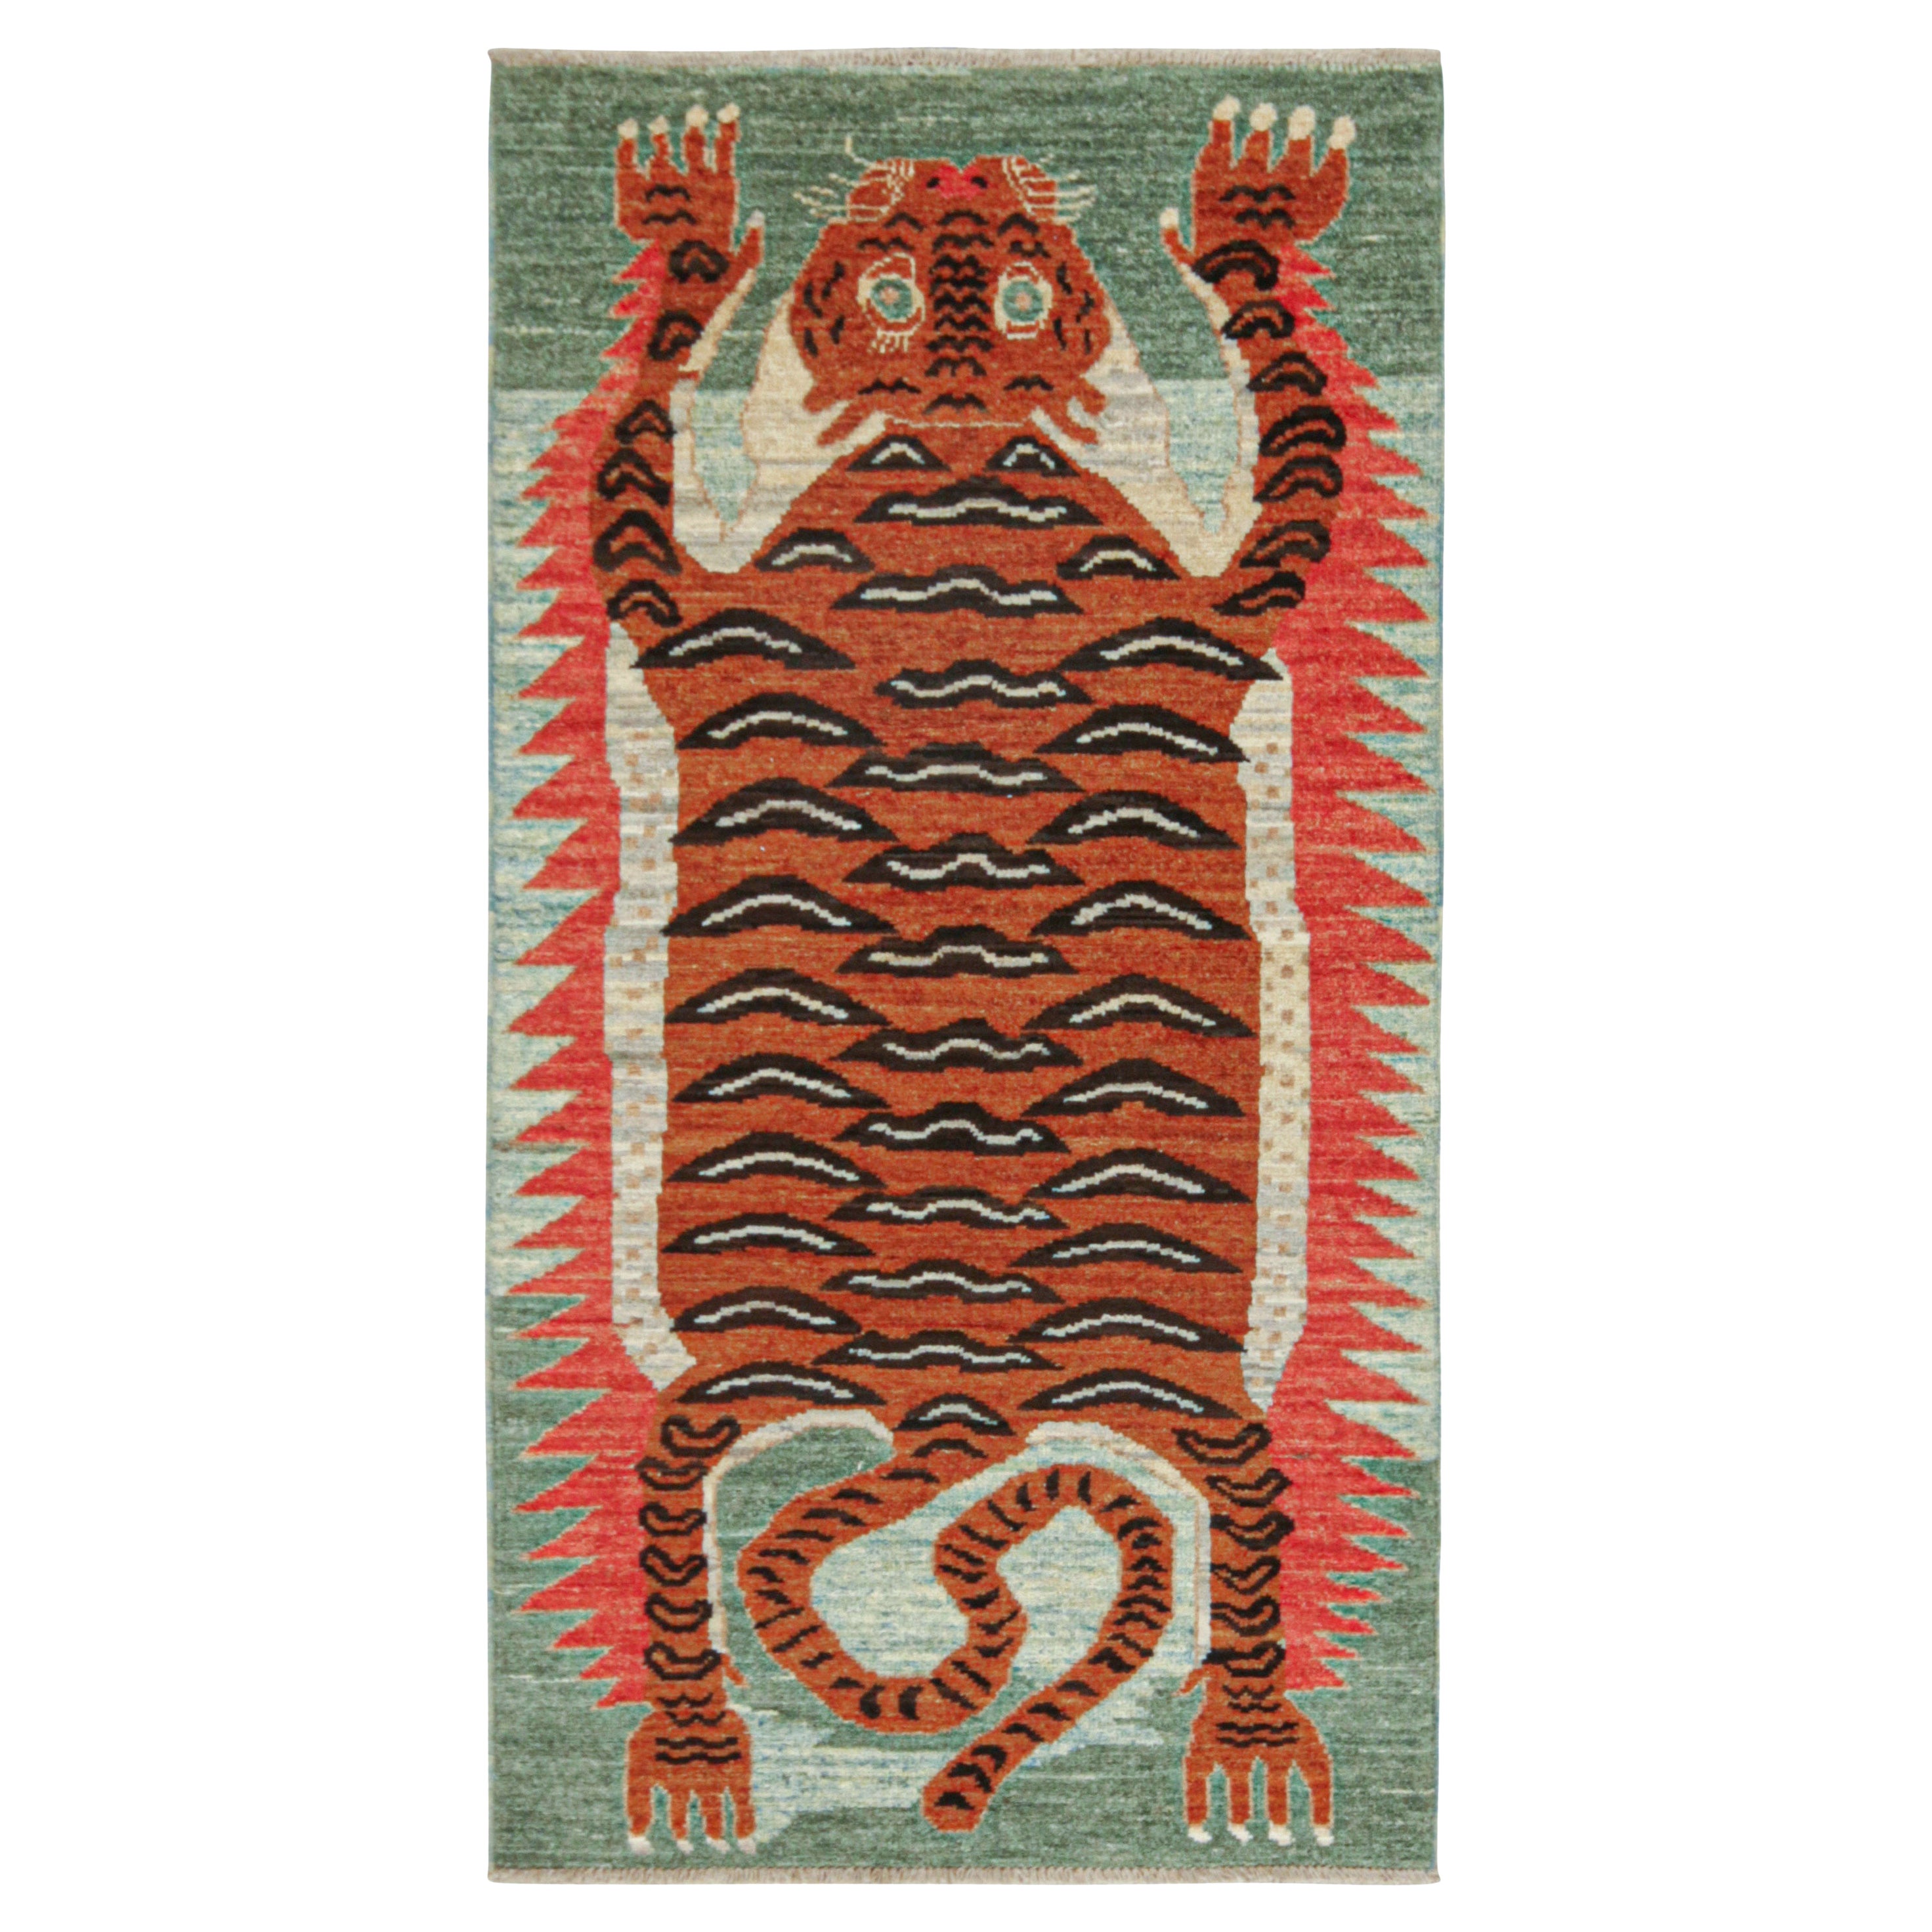 Rug & Kilim’s Classic Style Tiger-Skin Runner with Orange and Brown Pictorial For Sale